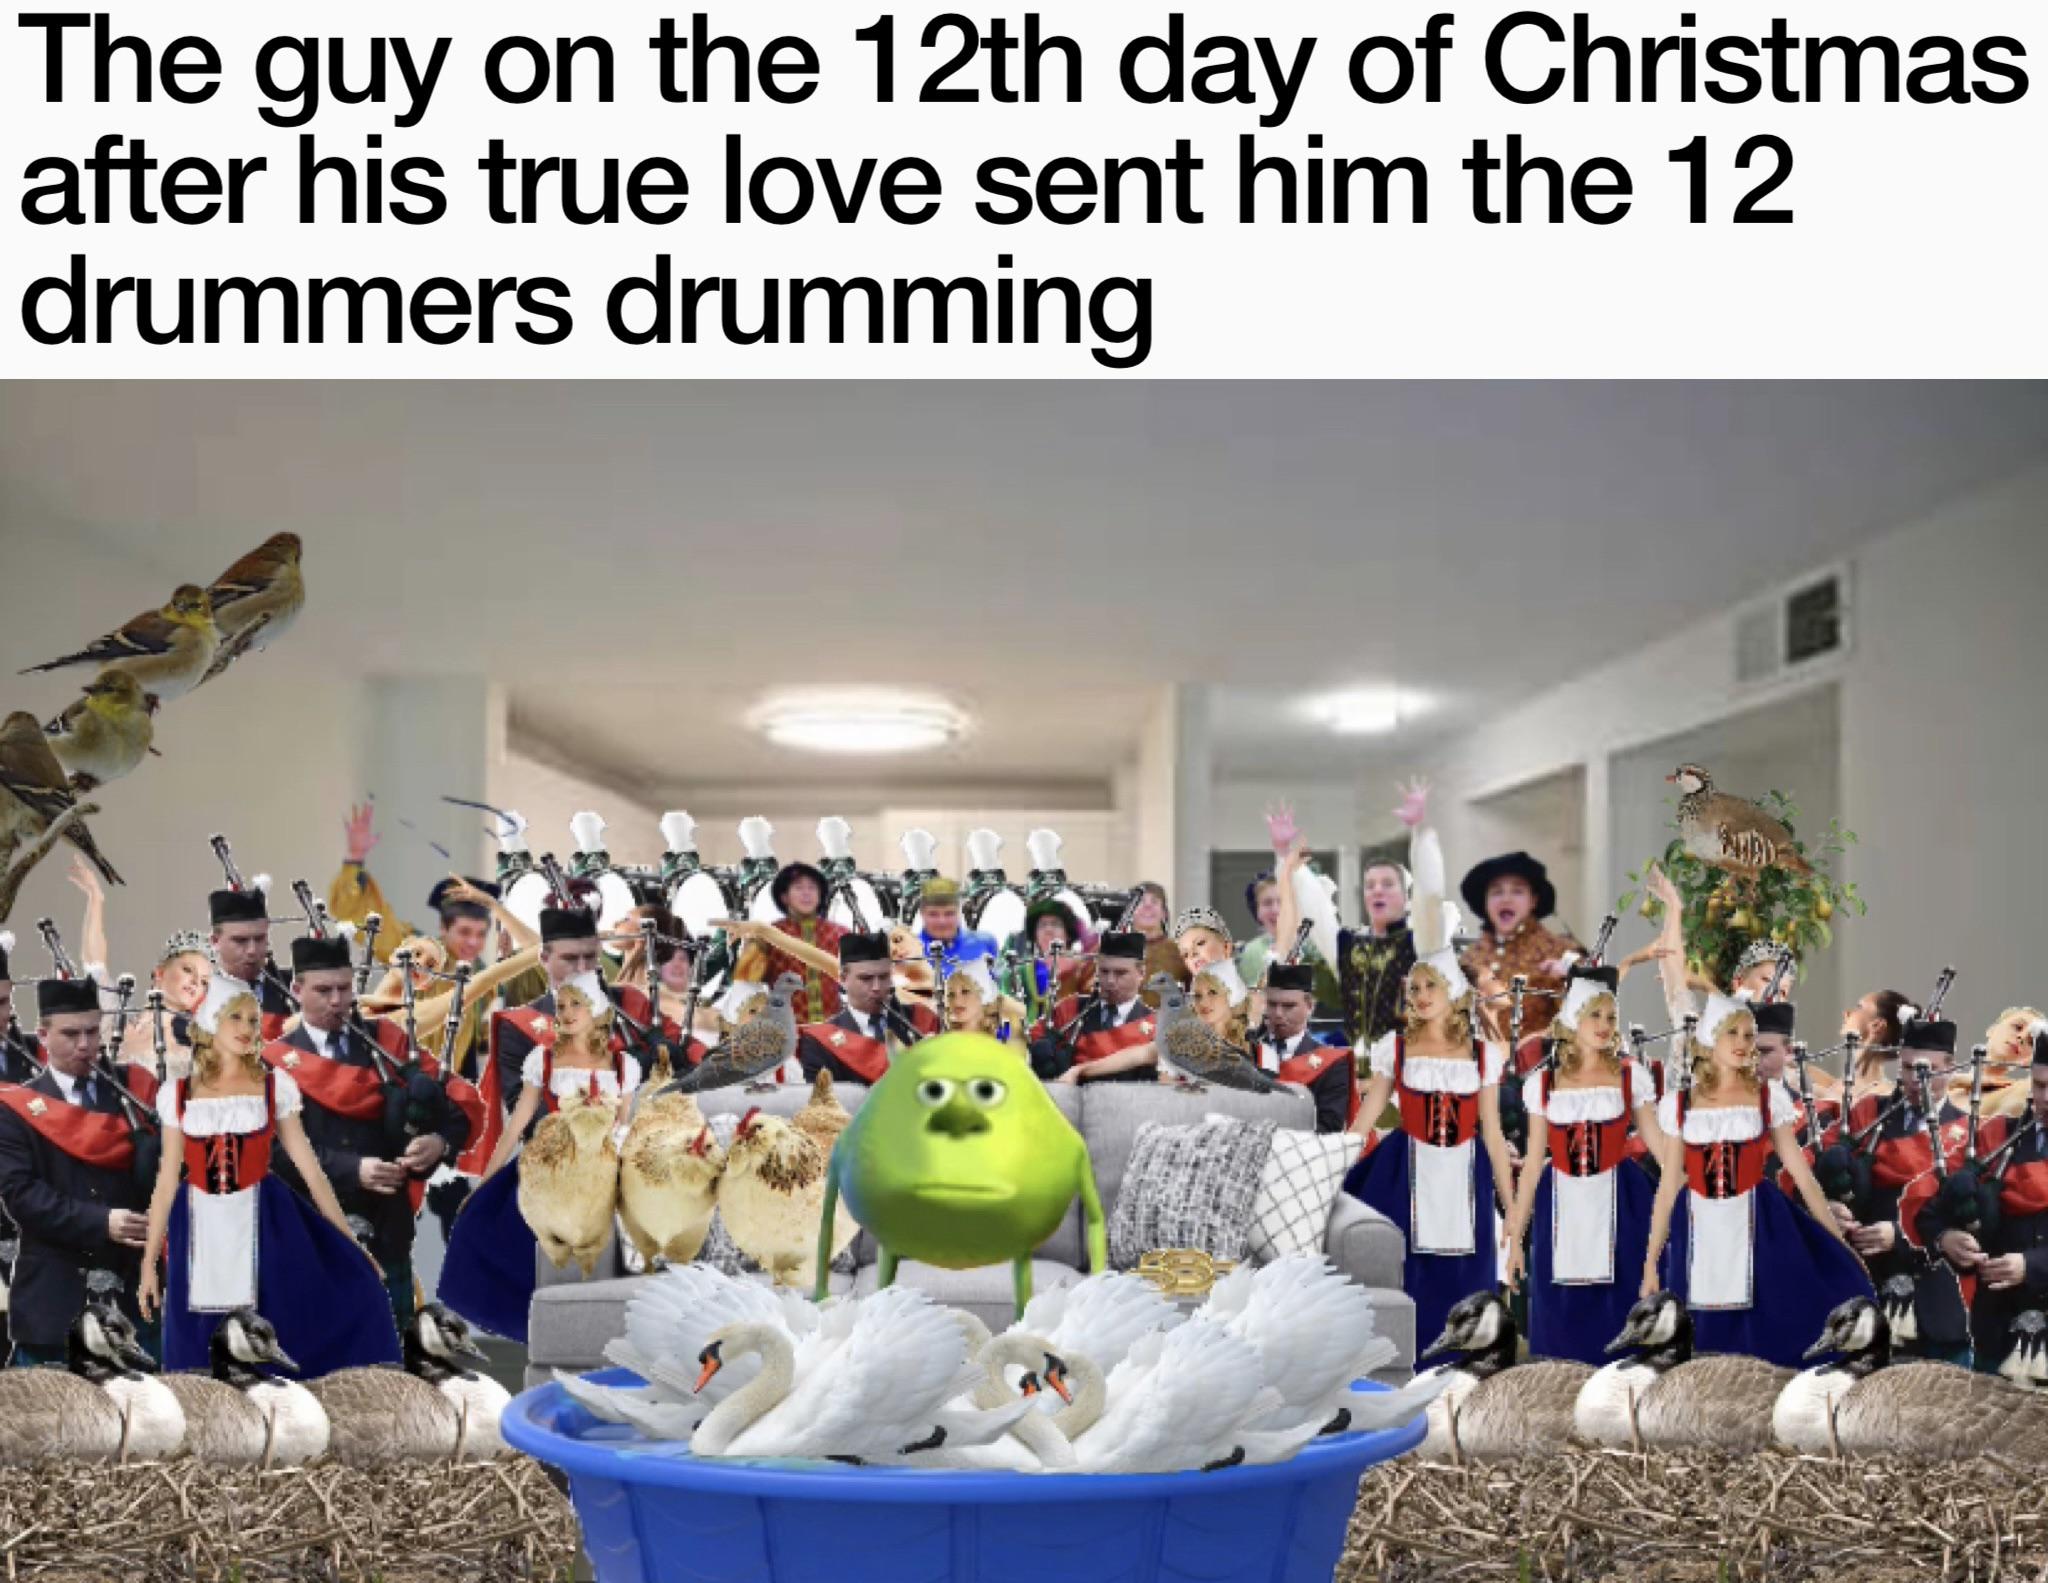 community - The guy on the 12th day of Christmas after his true love sent him the 12 drummers drumming